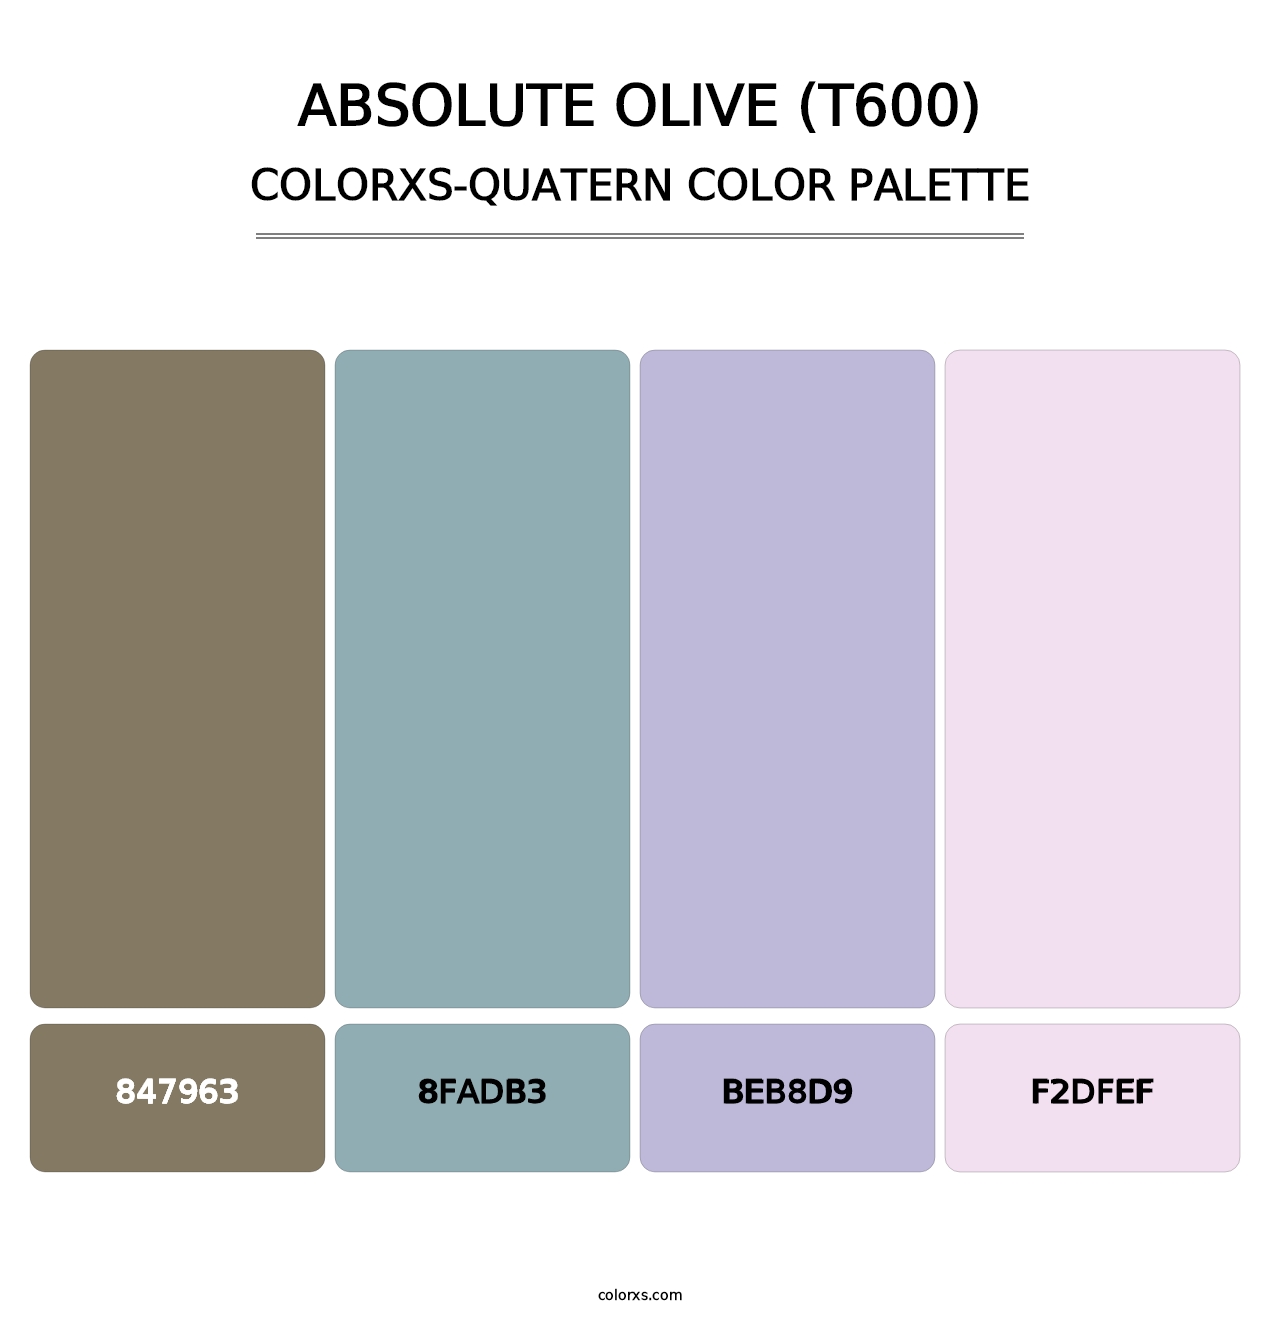 Absolute Olive (T600) - Colorxs Quatern Palette